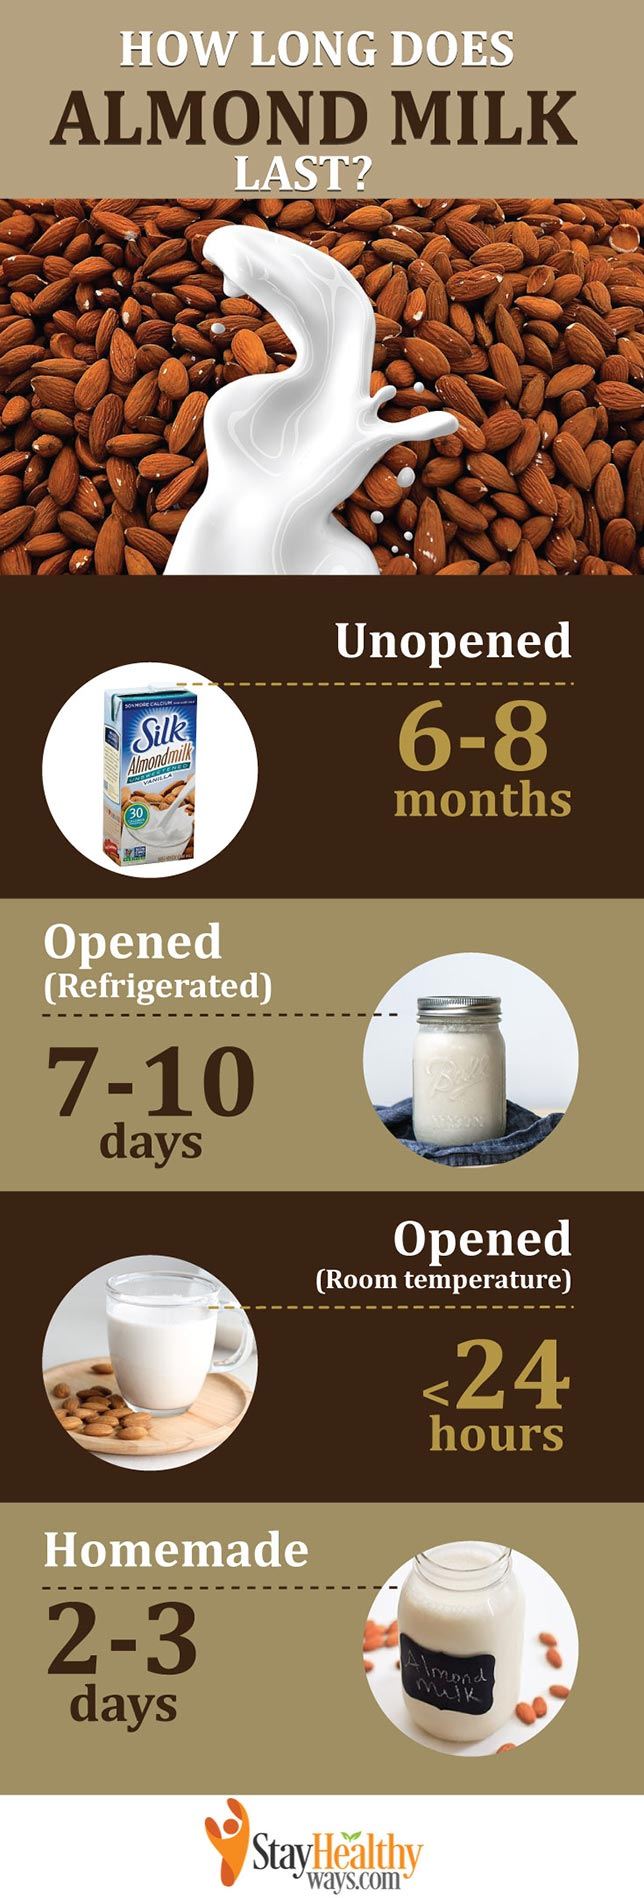 how long does almond milk last infographic